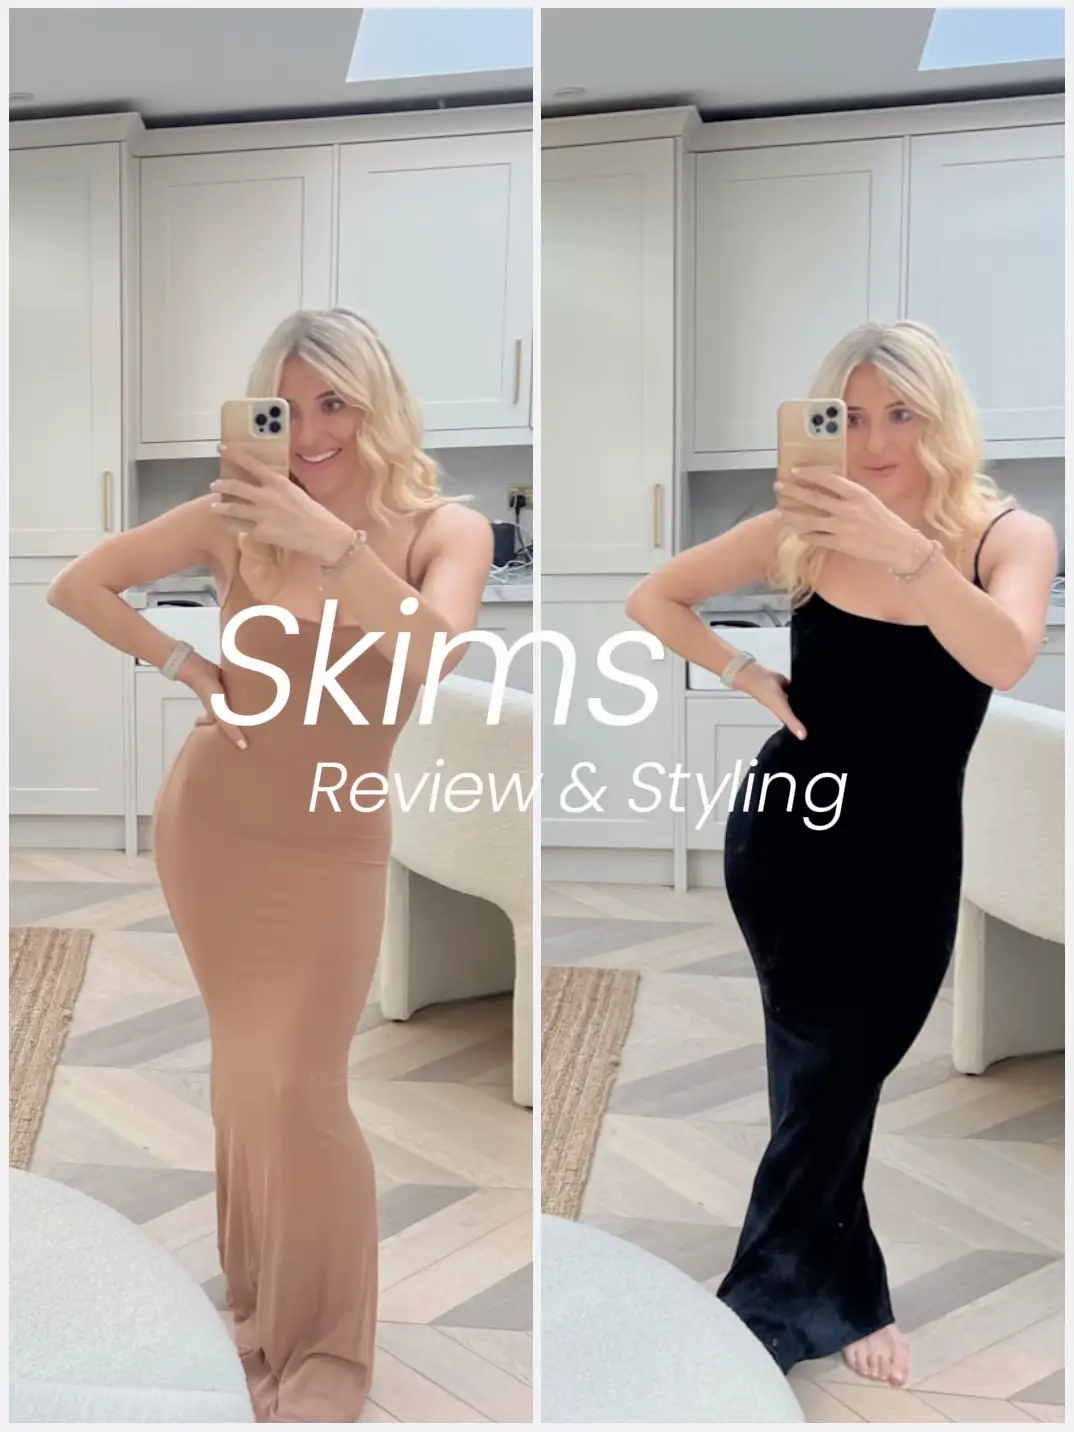 What is special about skims clothing? I'm starting a comfortwear